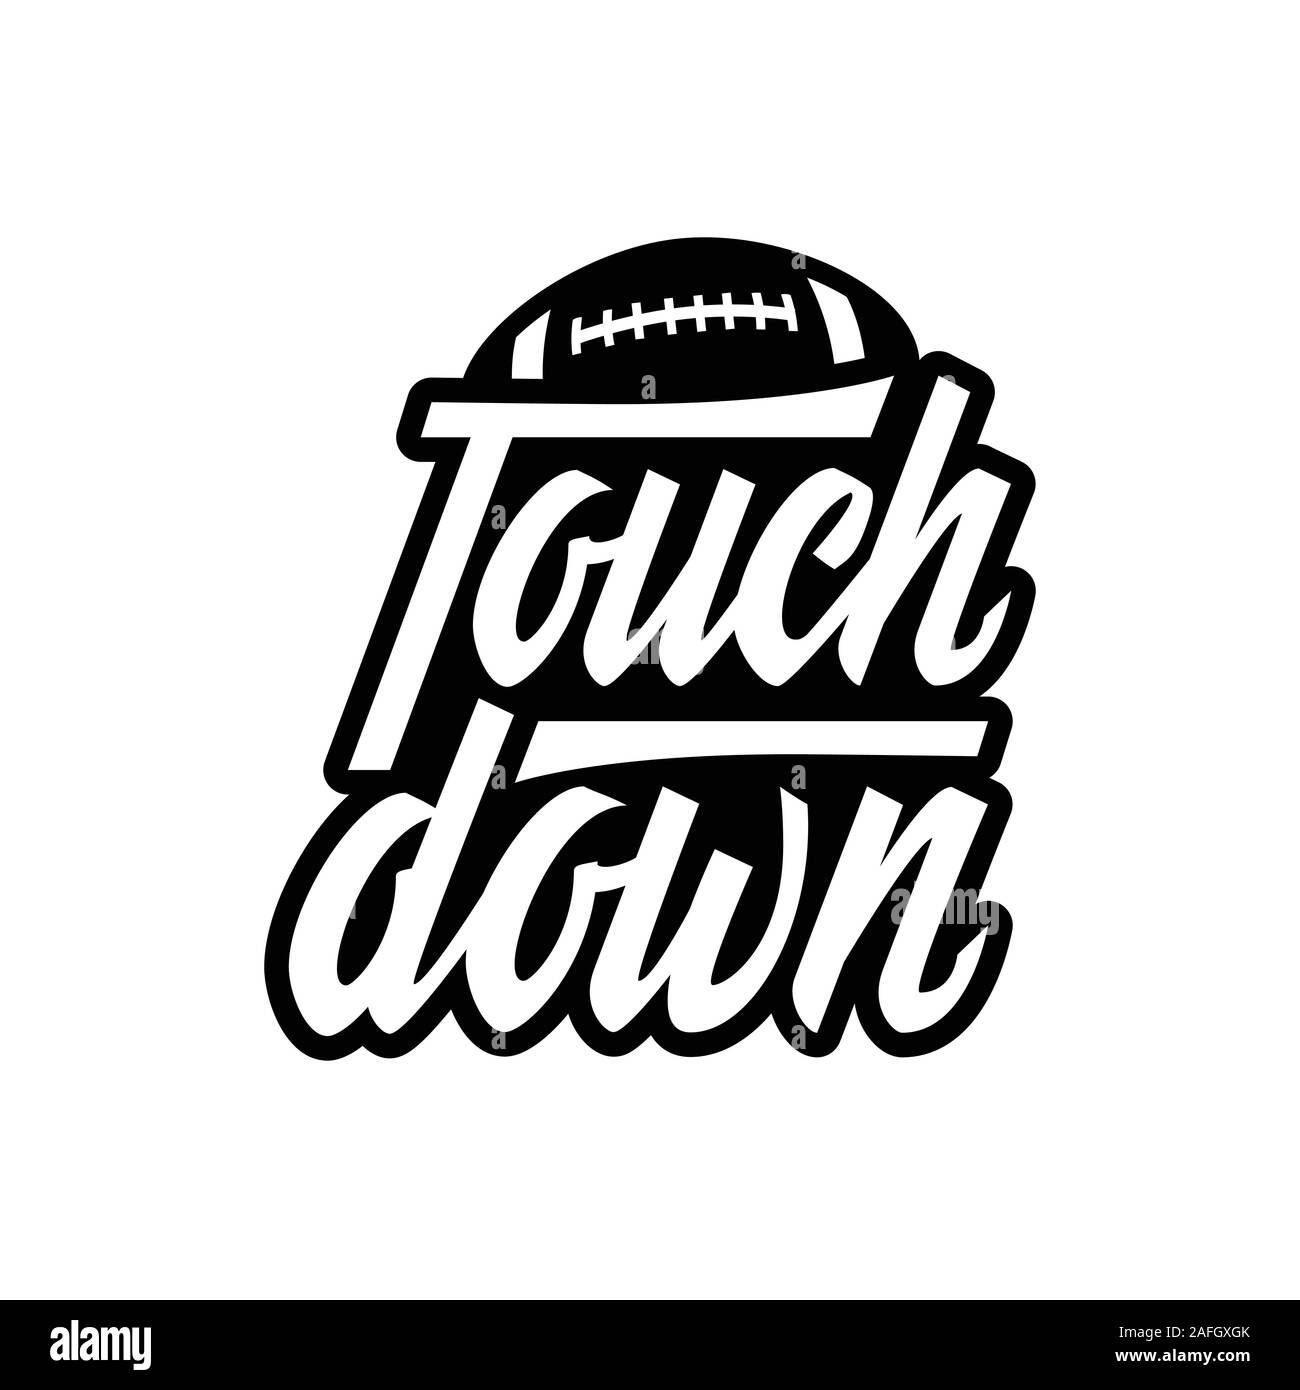 Hand lettering american football logo label. Black and white vector illustration for print on tshirt, sport equipment and championship souvenirs Stock Vector